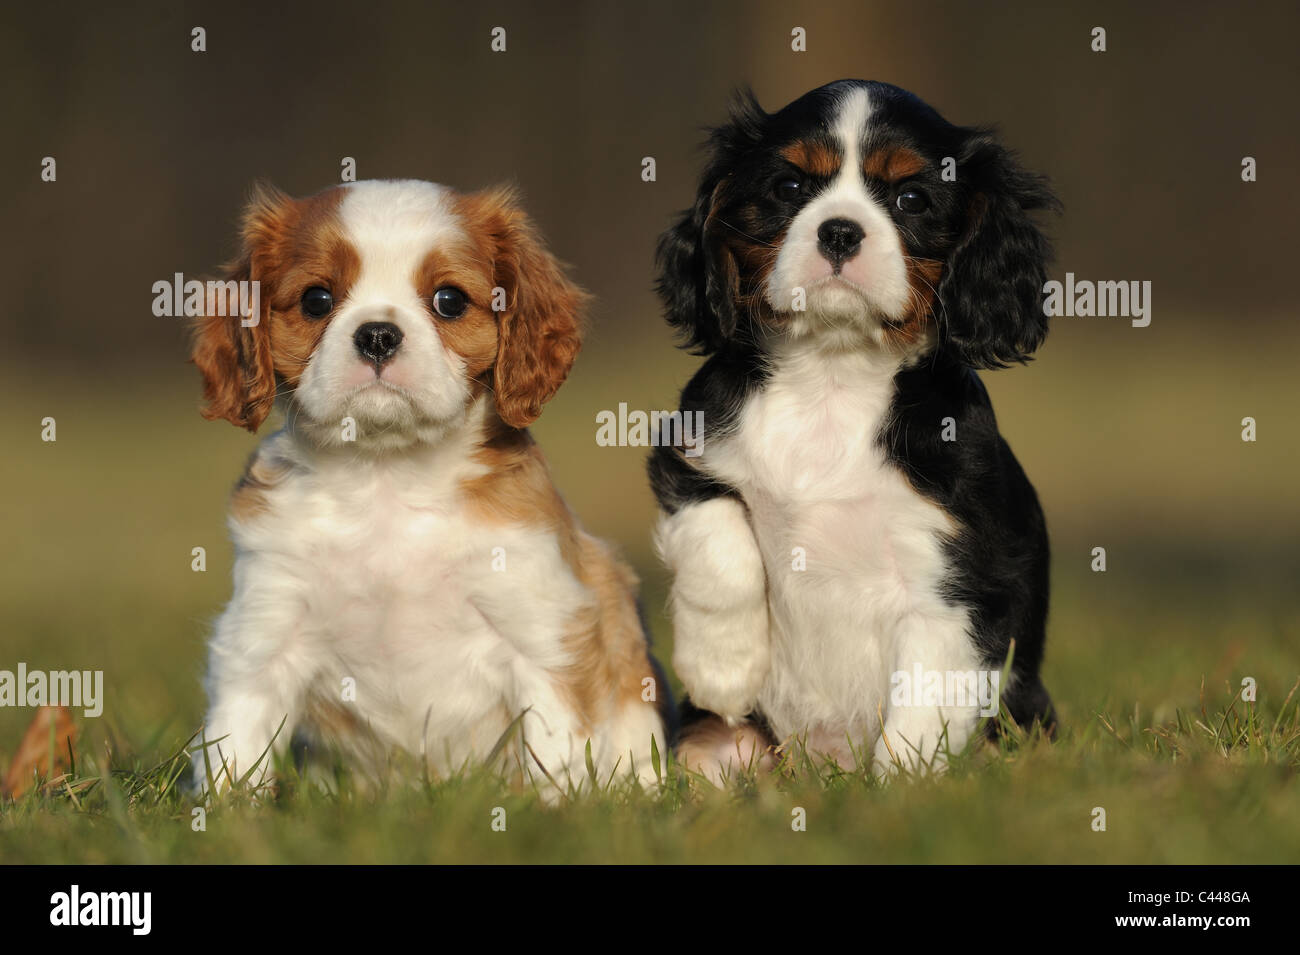 Cavalier King Charles Spaniel (Canis lupus familiaris), two puppies sitting in grass. Stock Photo